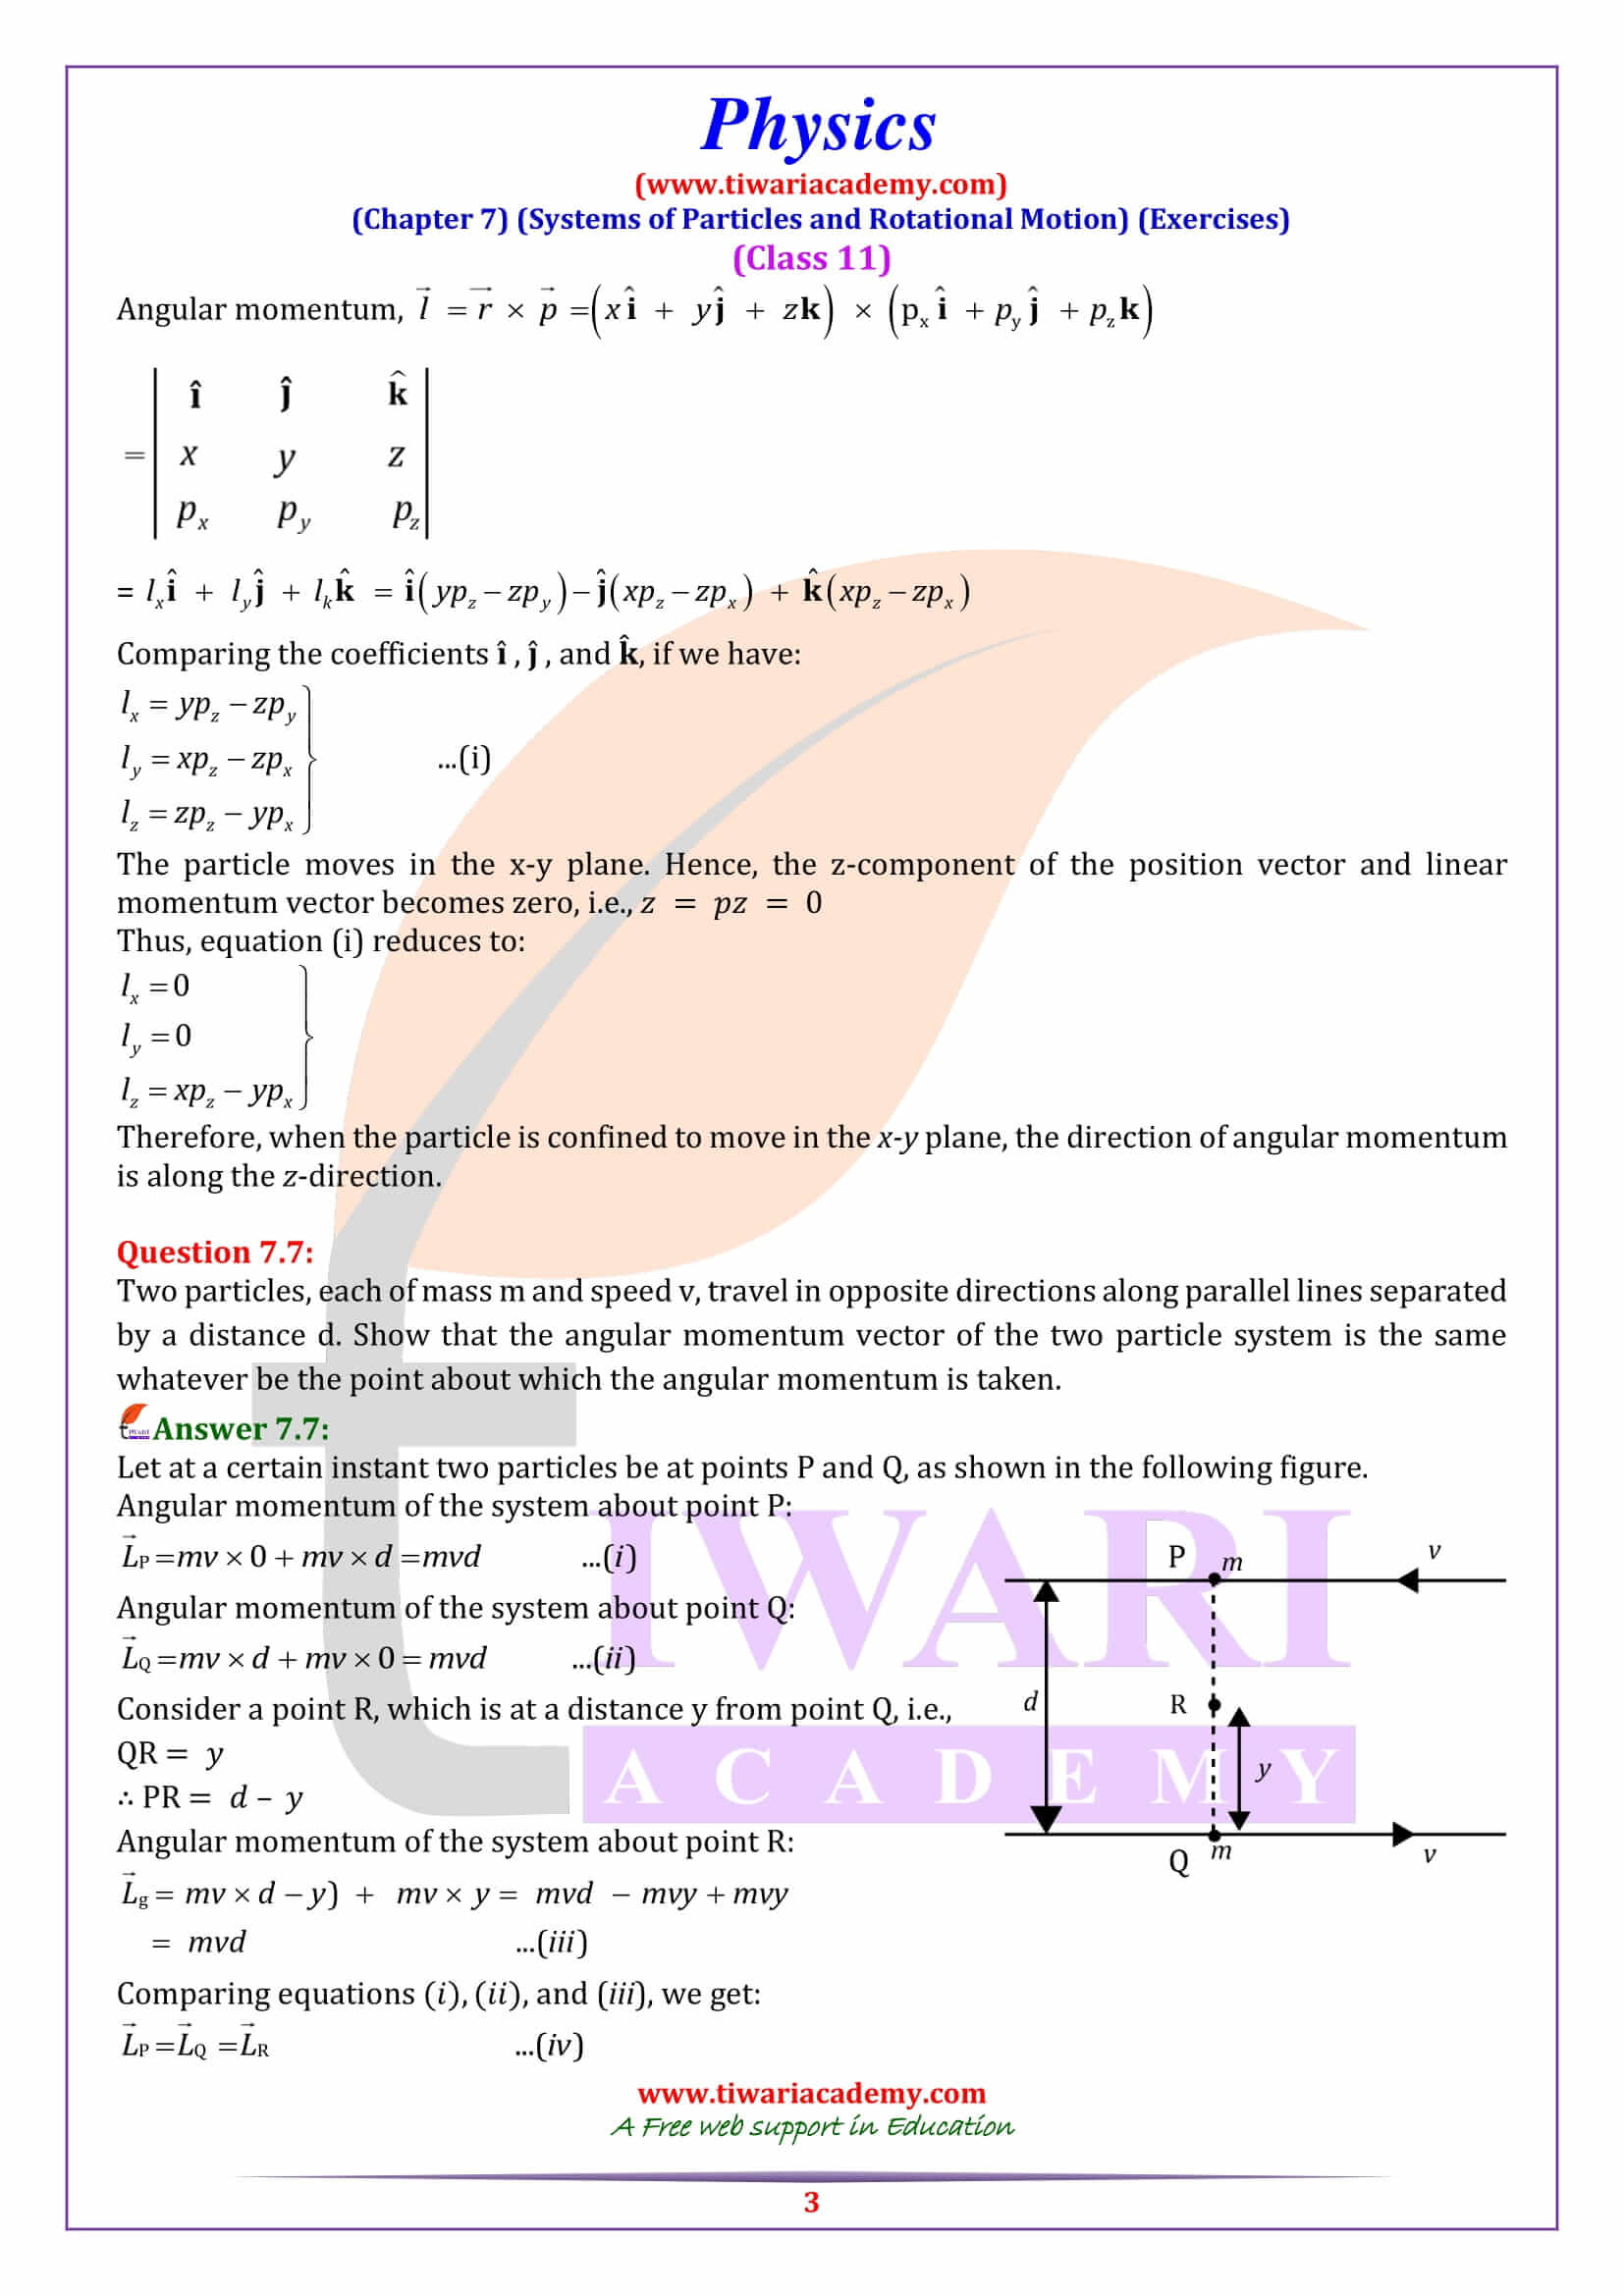 Class 11 Physics Chapter 7 Exercises NCERT Solutions